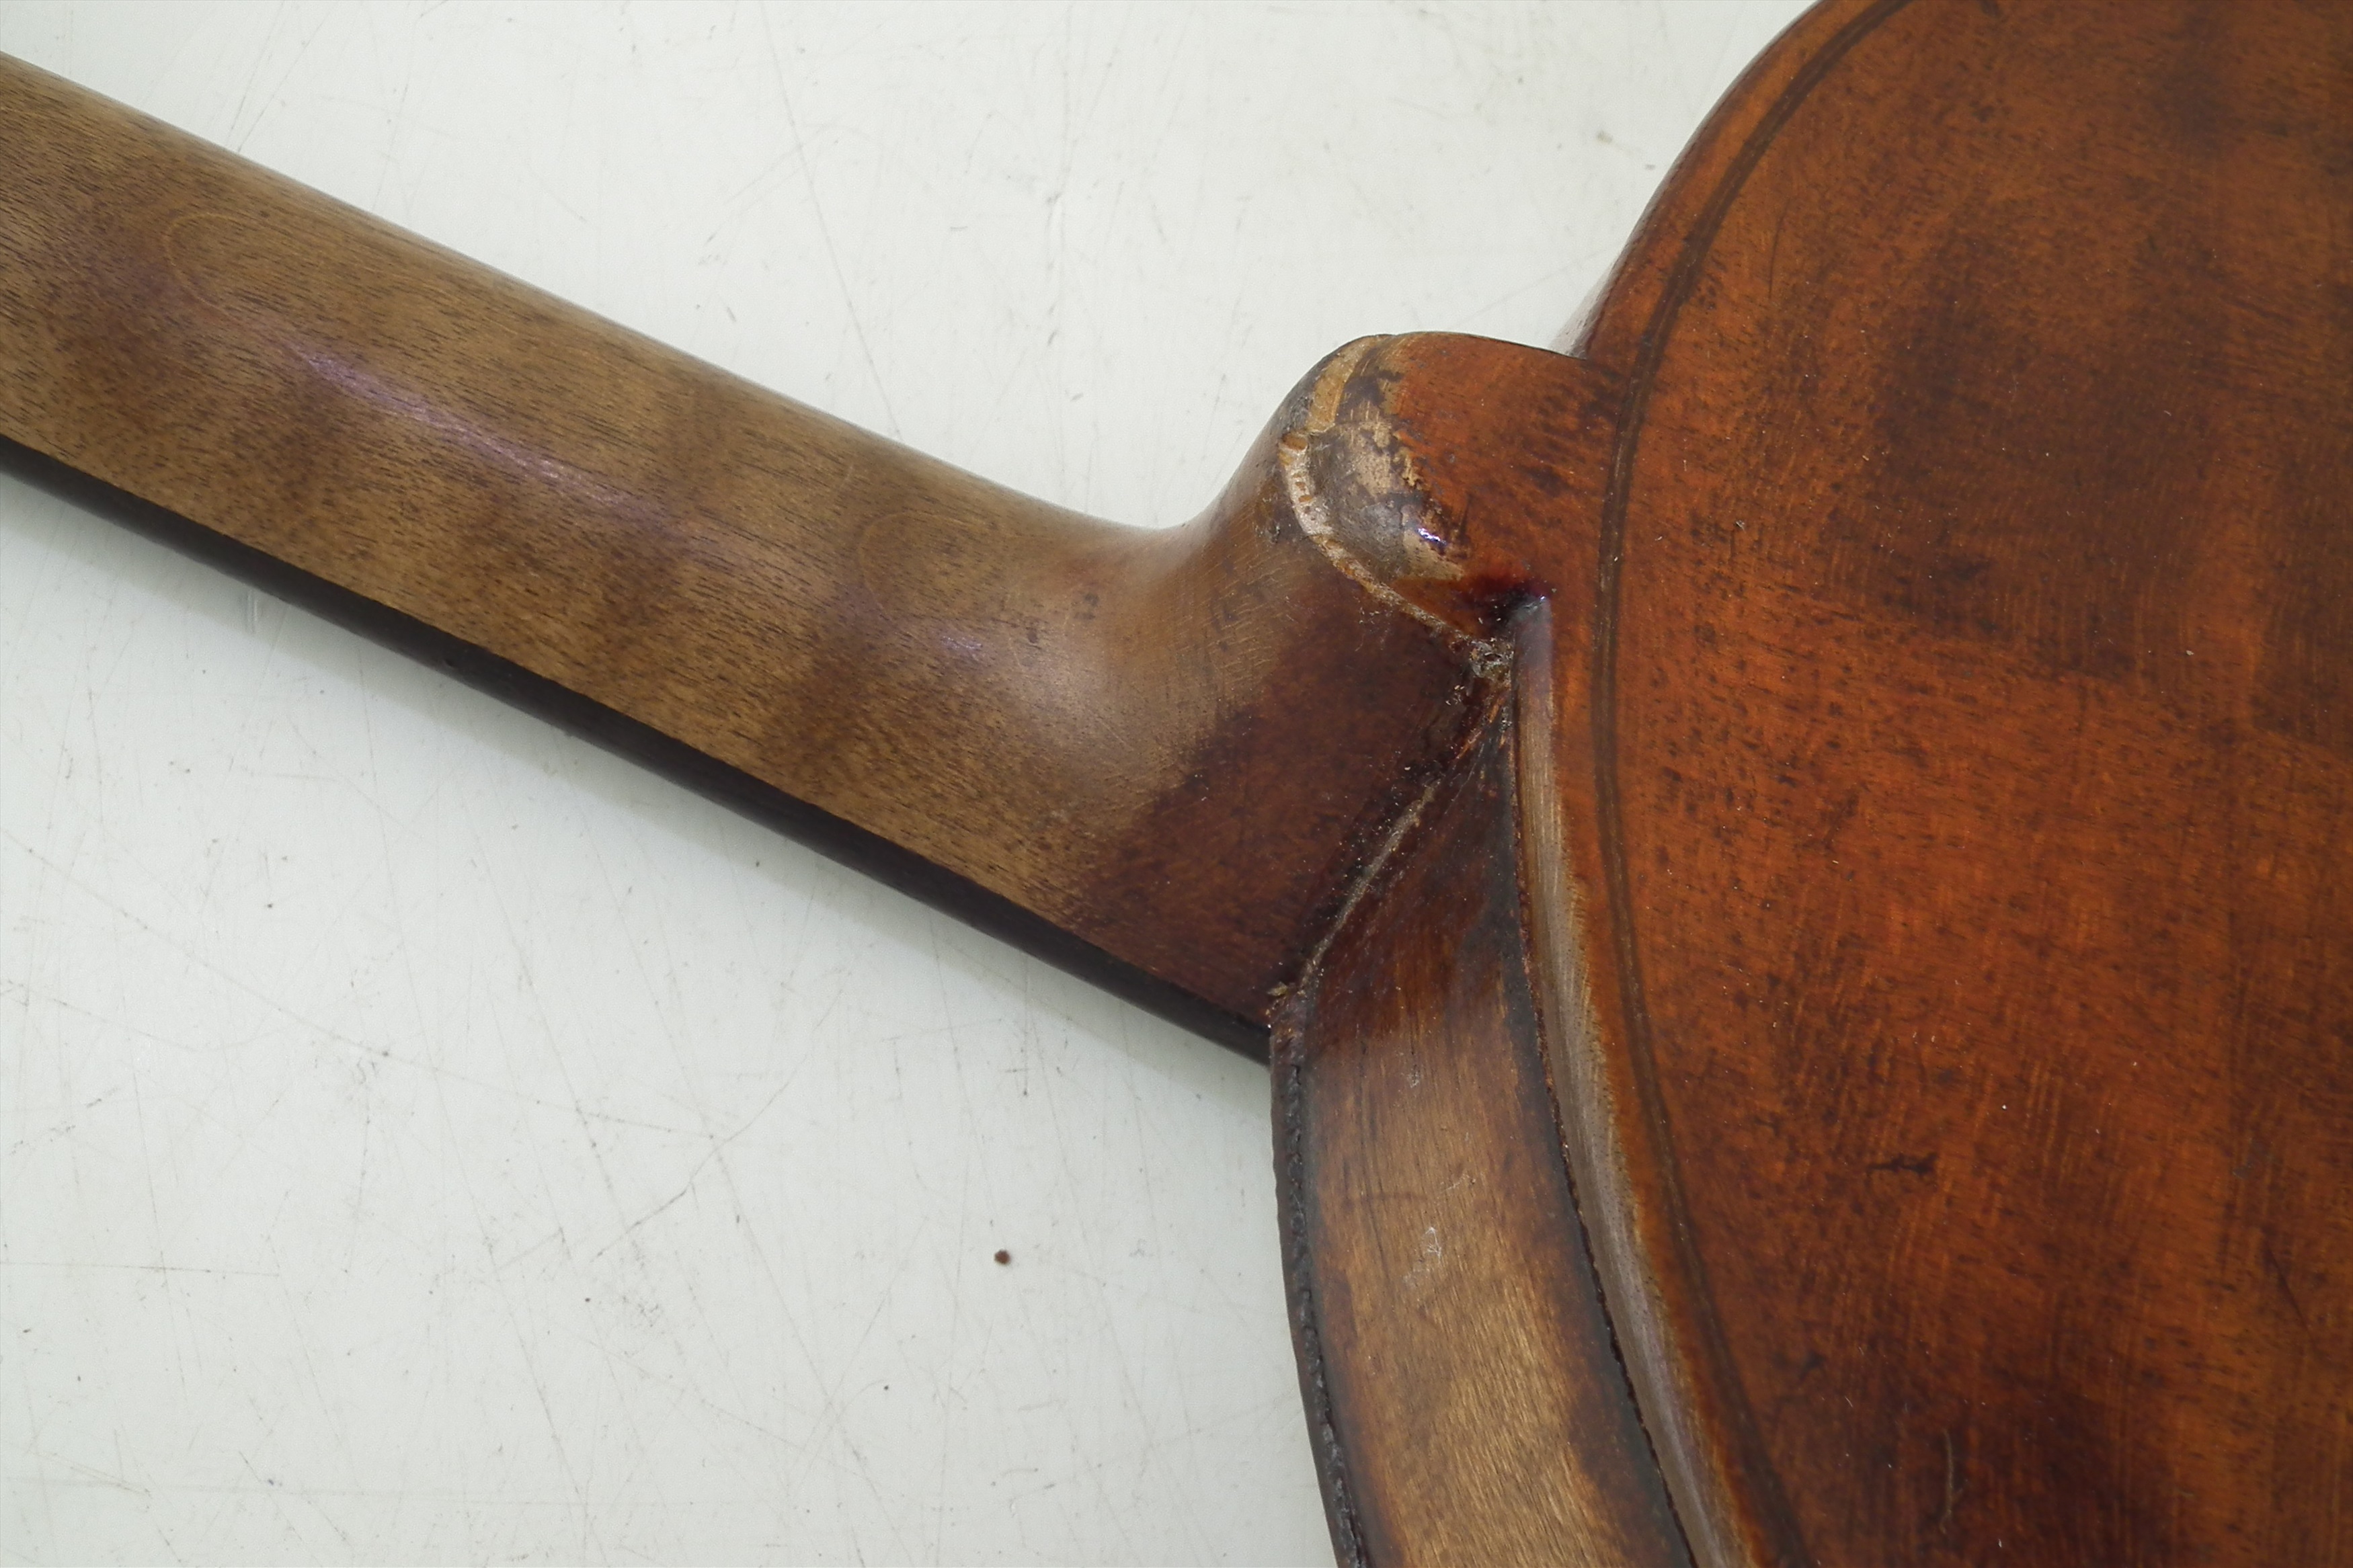 German lion head scroll violin together with one other violin, both with cases. - Image 10 of 14